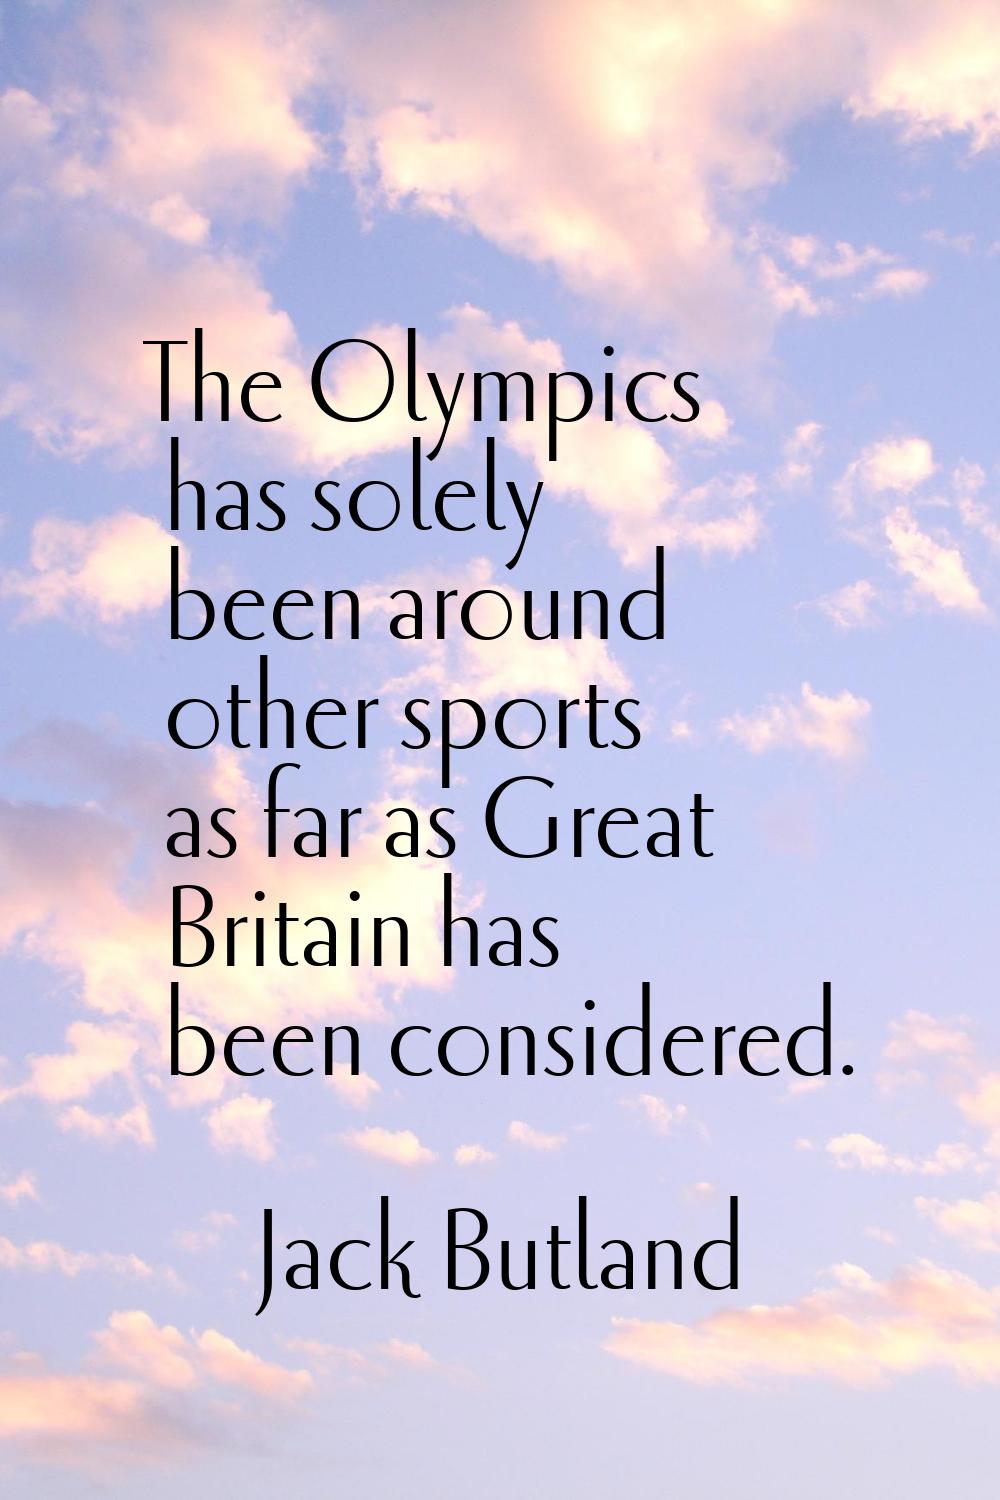 The Olympics has solely been around other sports as far as Great Britain has been considered.